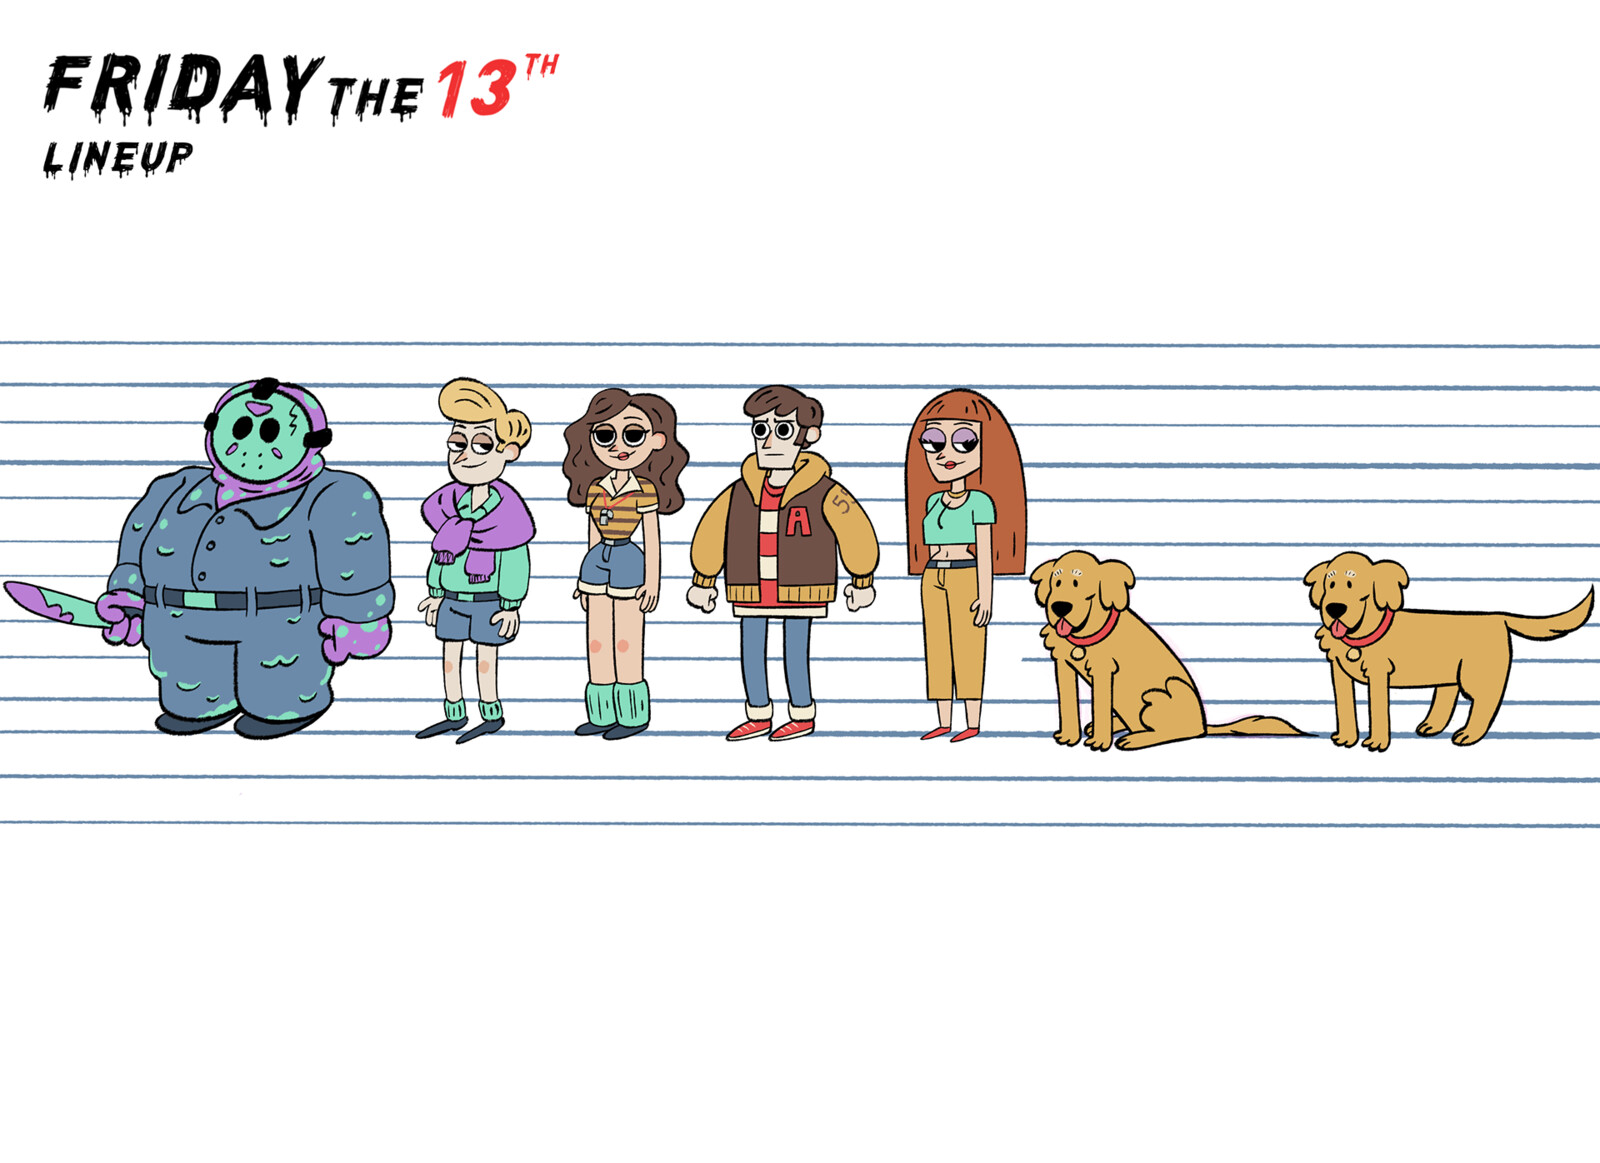 Friday the 13th: Character Lineup